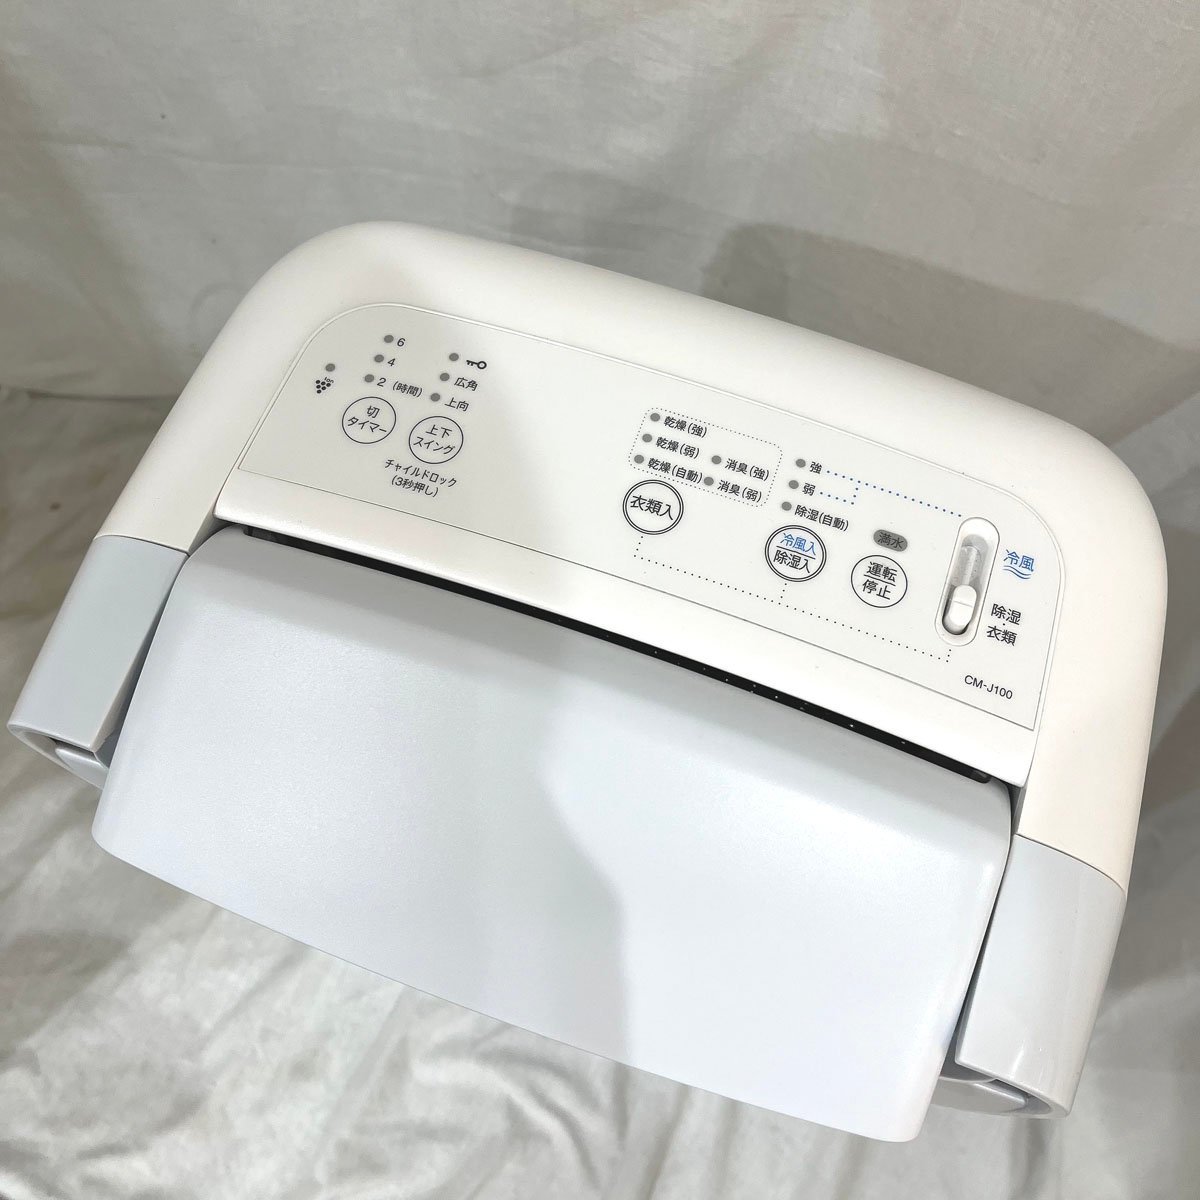  used *SHARP/ sharp * dehumidifier CM-J100-W 2019 year made cold manner clothes dry "plasma cluster" white Sapporo 